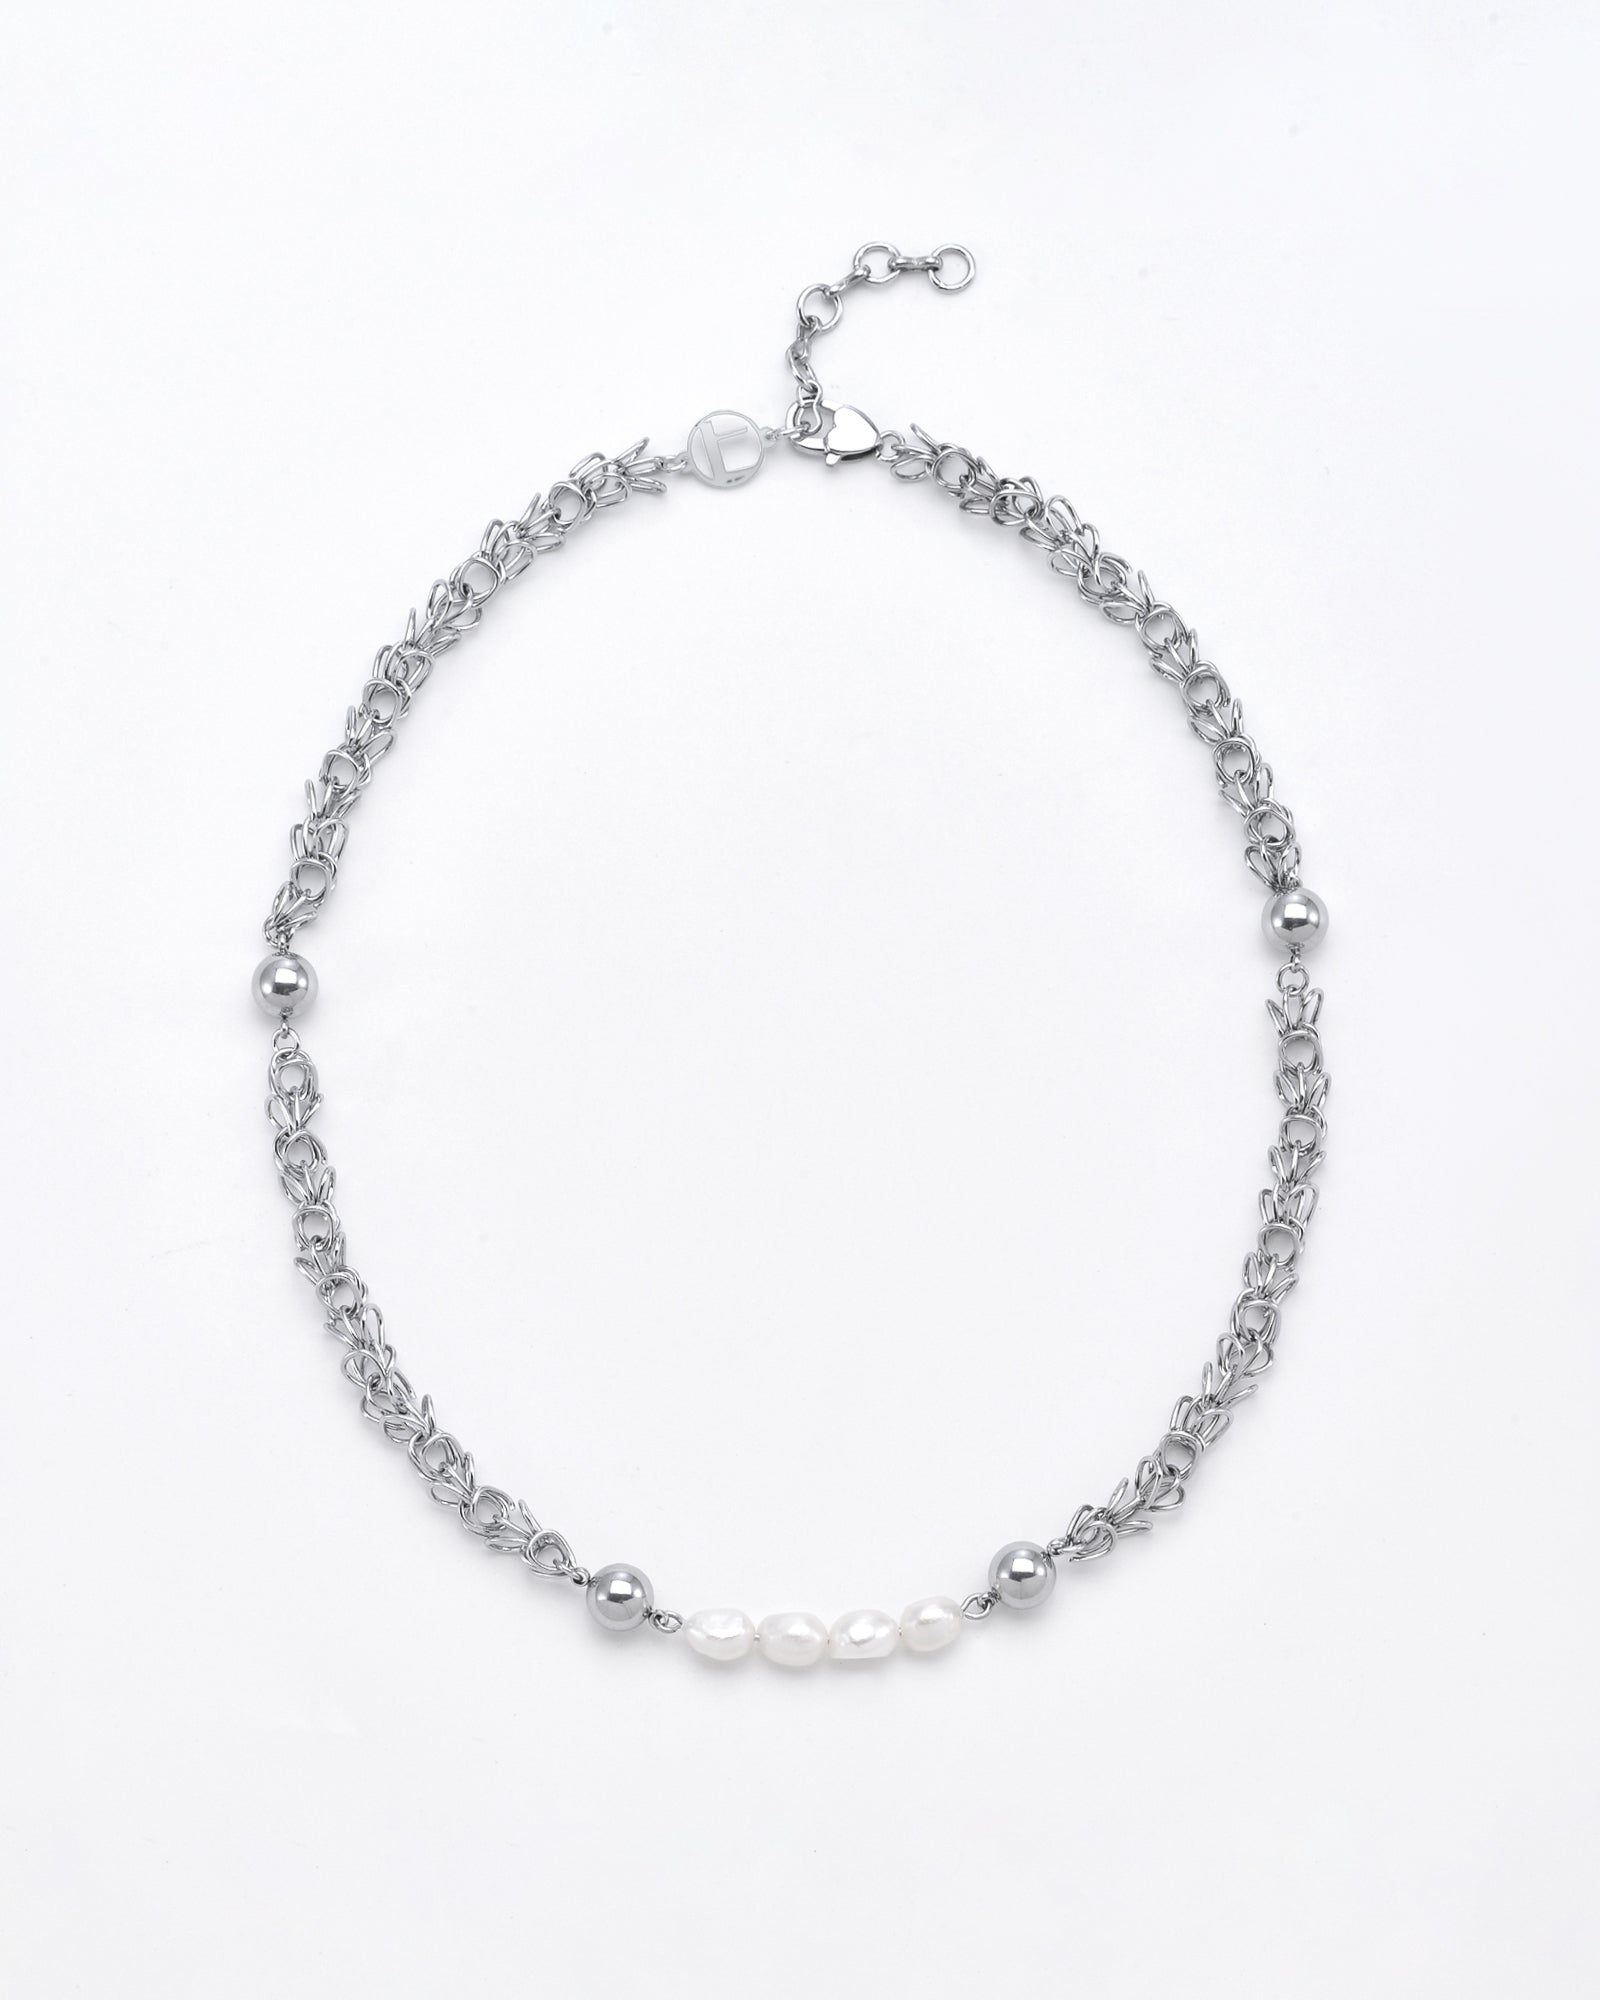 A delicate Athena Necklace Silver by For Art's Sake® with an intricate chain design, featuring three small freshwater pearls and several silver beads spaced symmetrically along the chain. This elegant choker includes an adjustable clasp against a plain, light grey background.